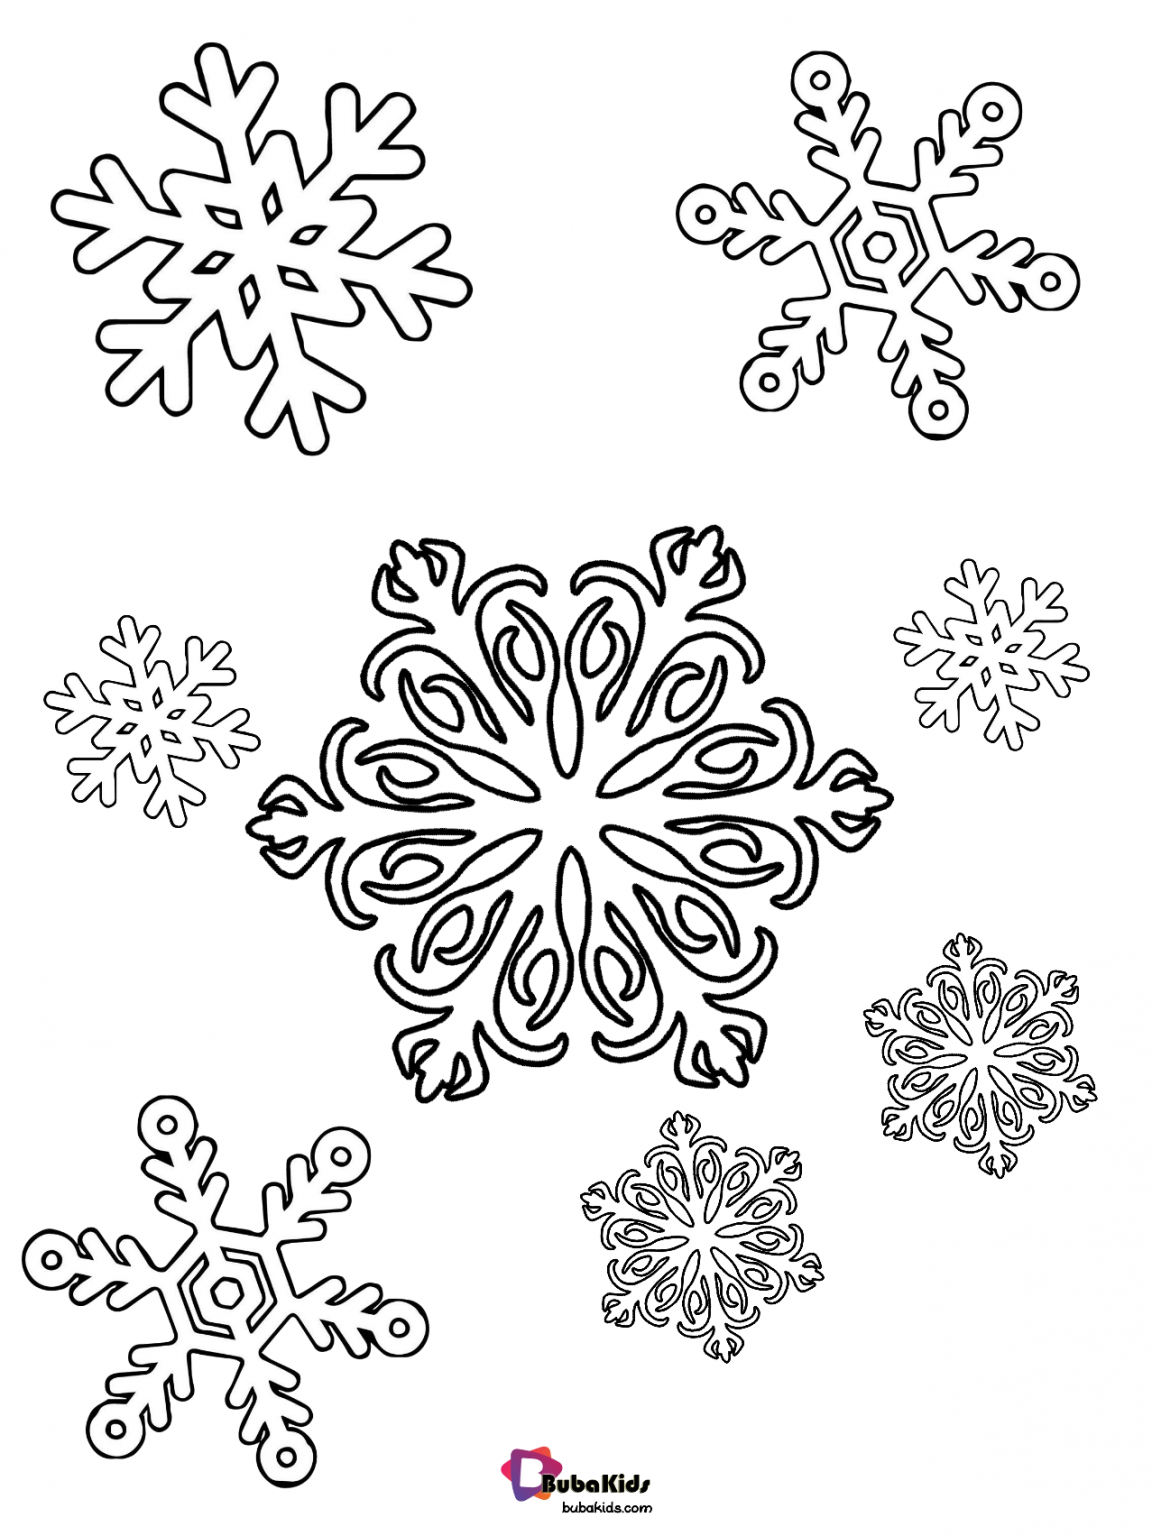 Free download winter snowflake printable coloring page. | BubaKids.com